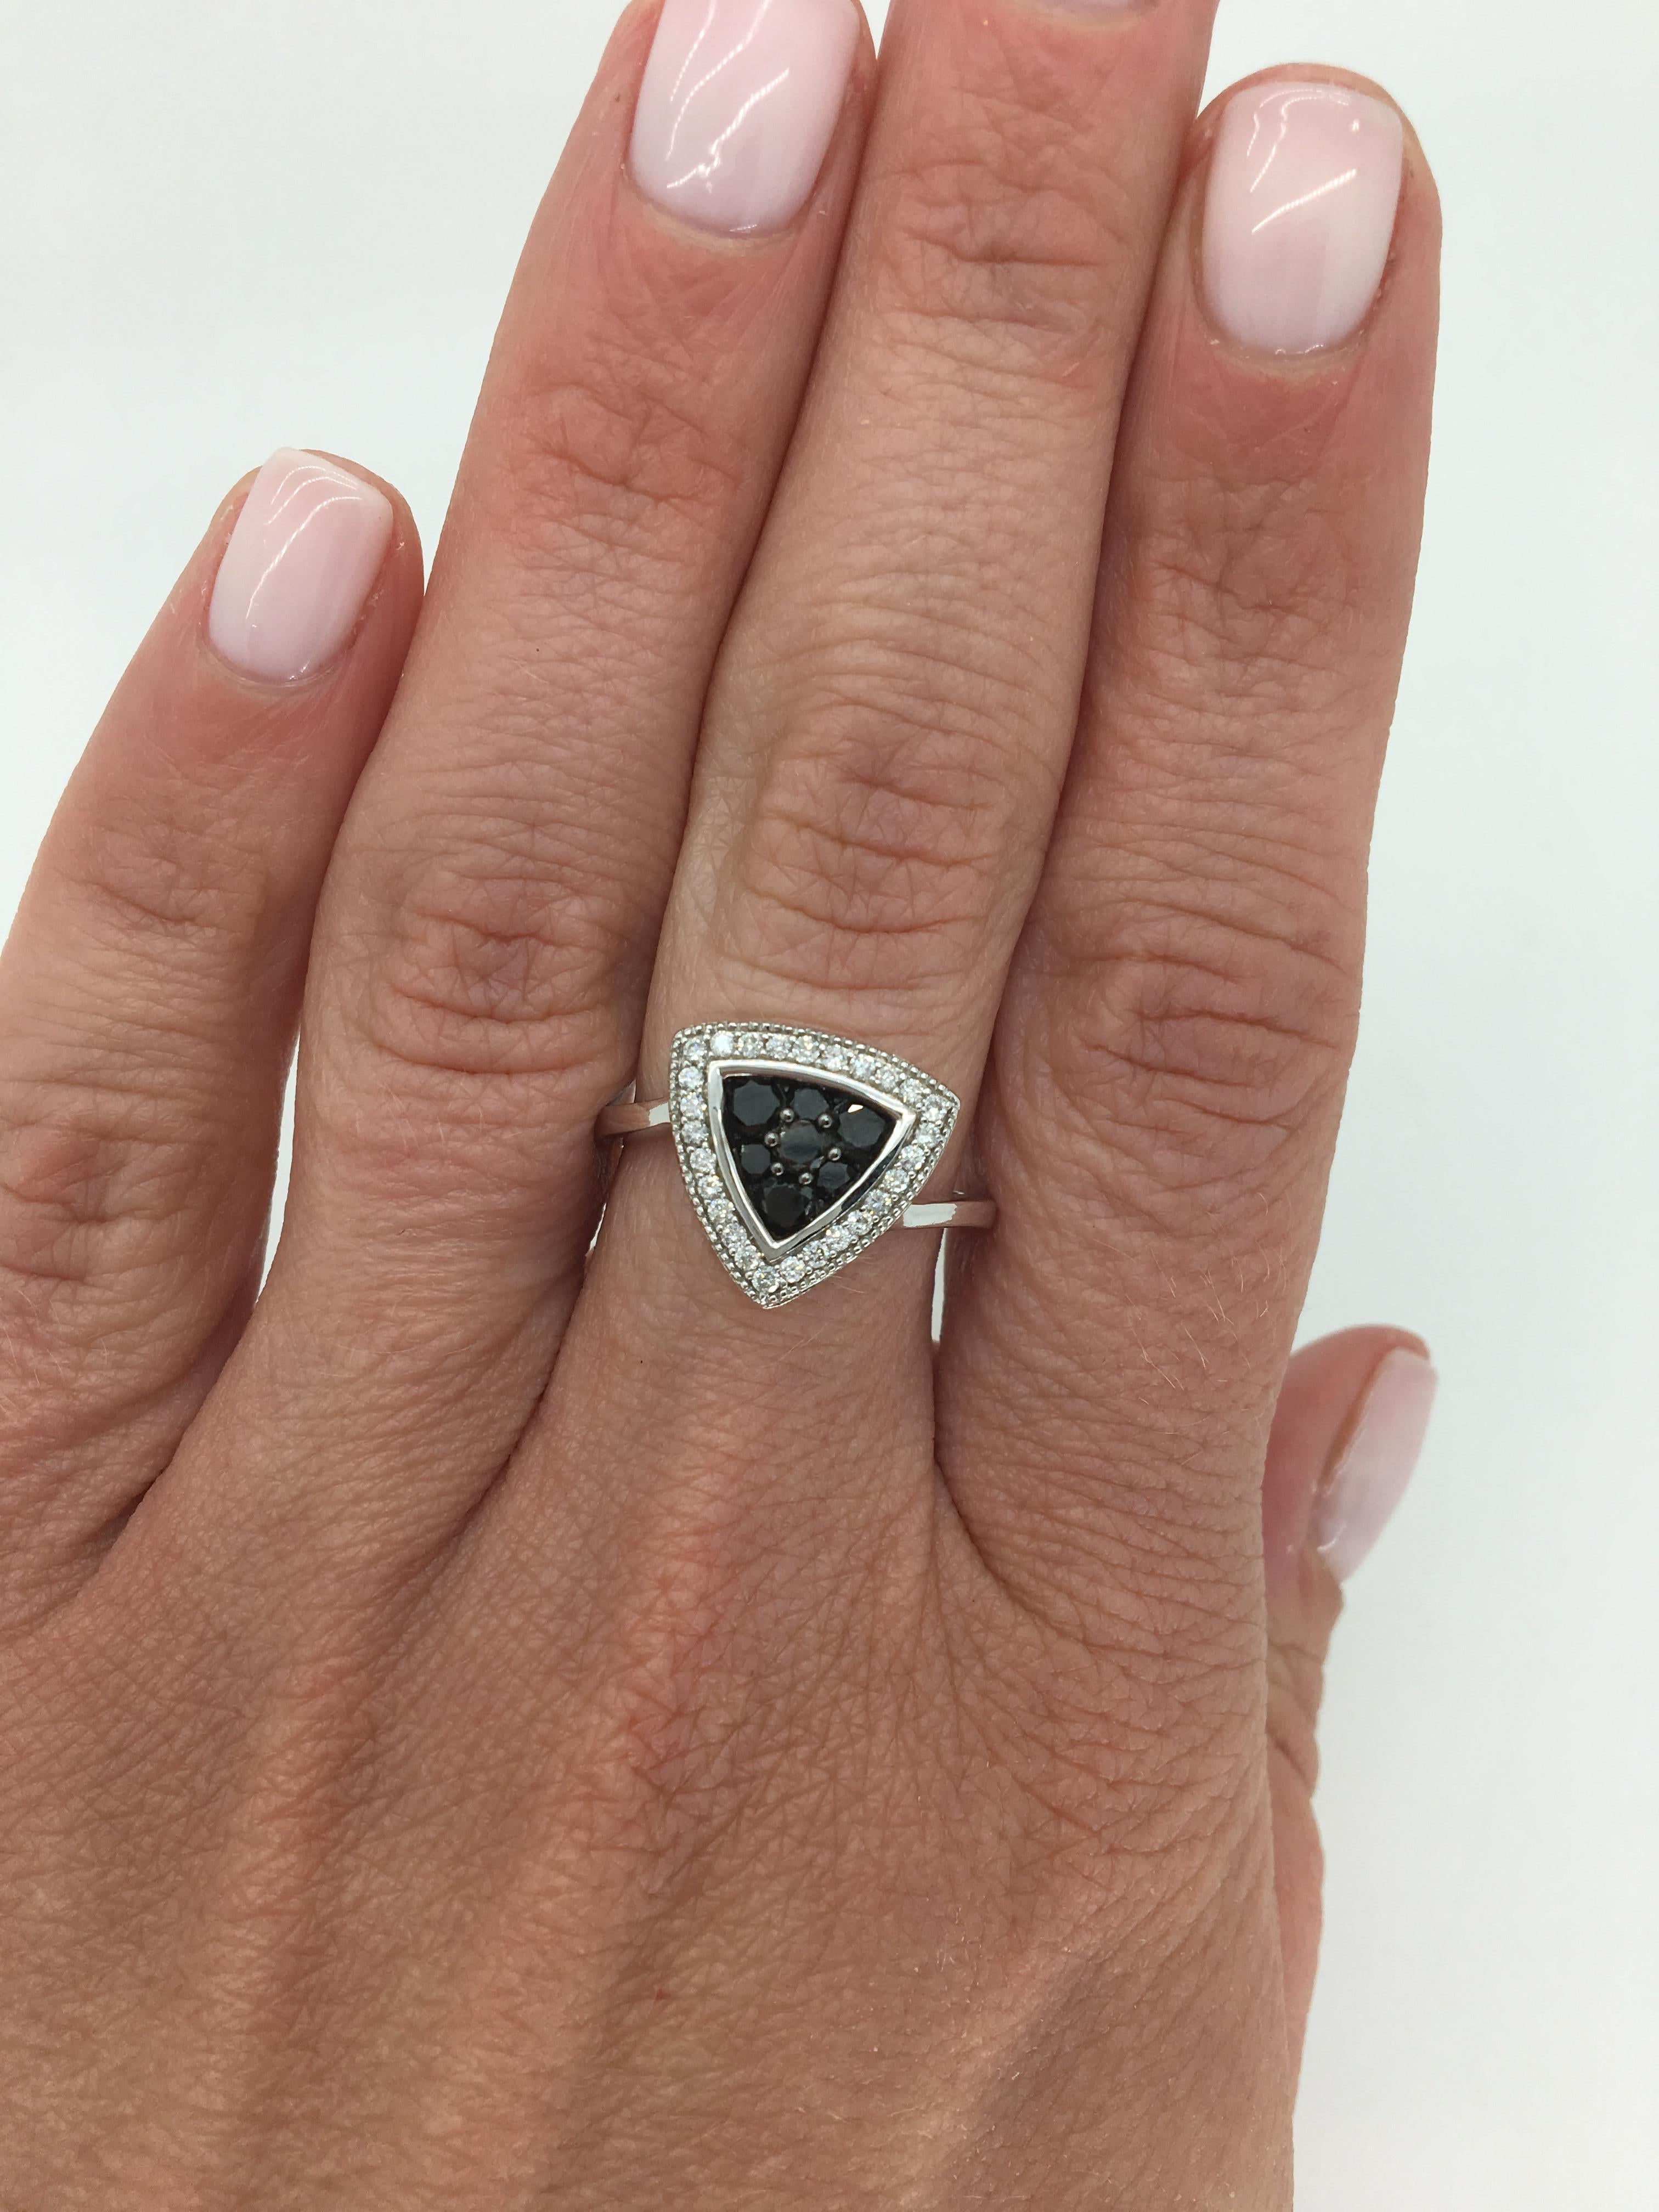 Triangular shaped black and white diamond ring crafted in 14K white gold.

Diamond Carat Weight: Approximately .64CTW
Diamond Cut: Round Brilliant Cut
Color: 27 with Average G-H and 7 that are Black in color
Clarity: Average I
Metal: 14K White